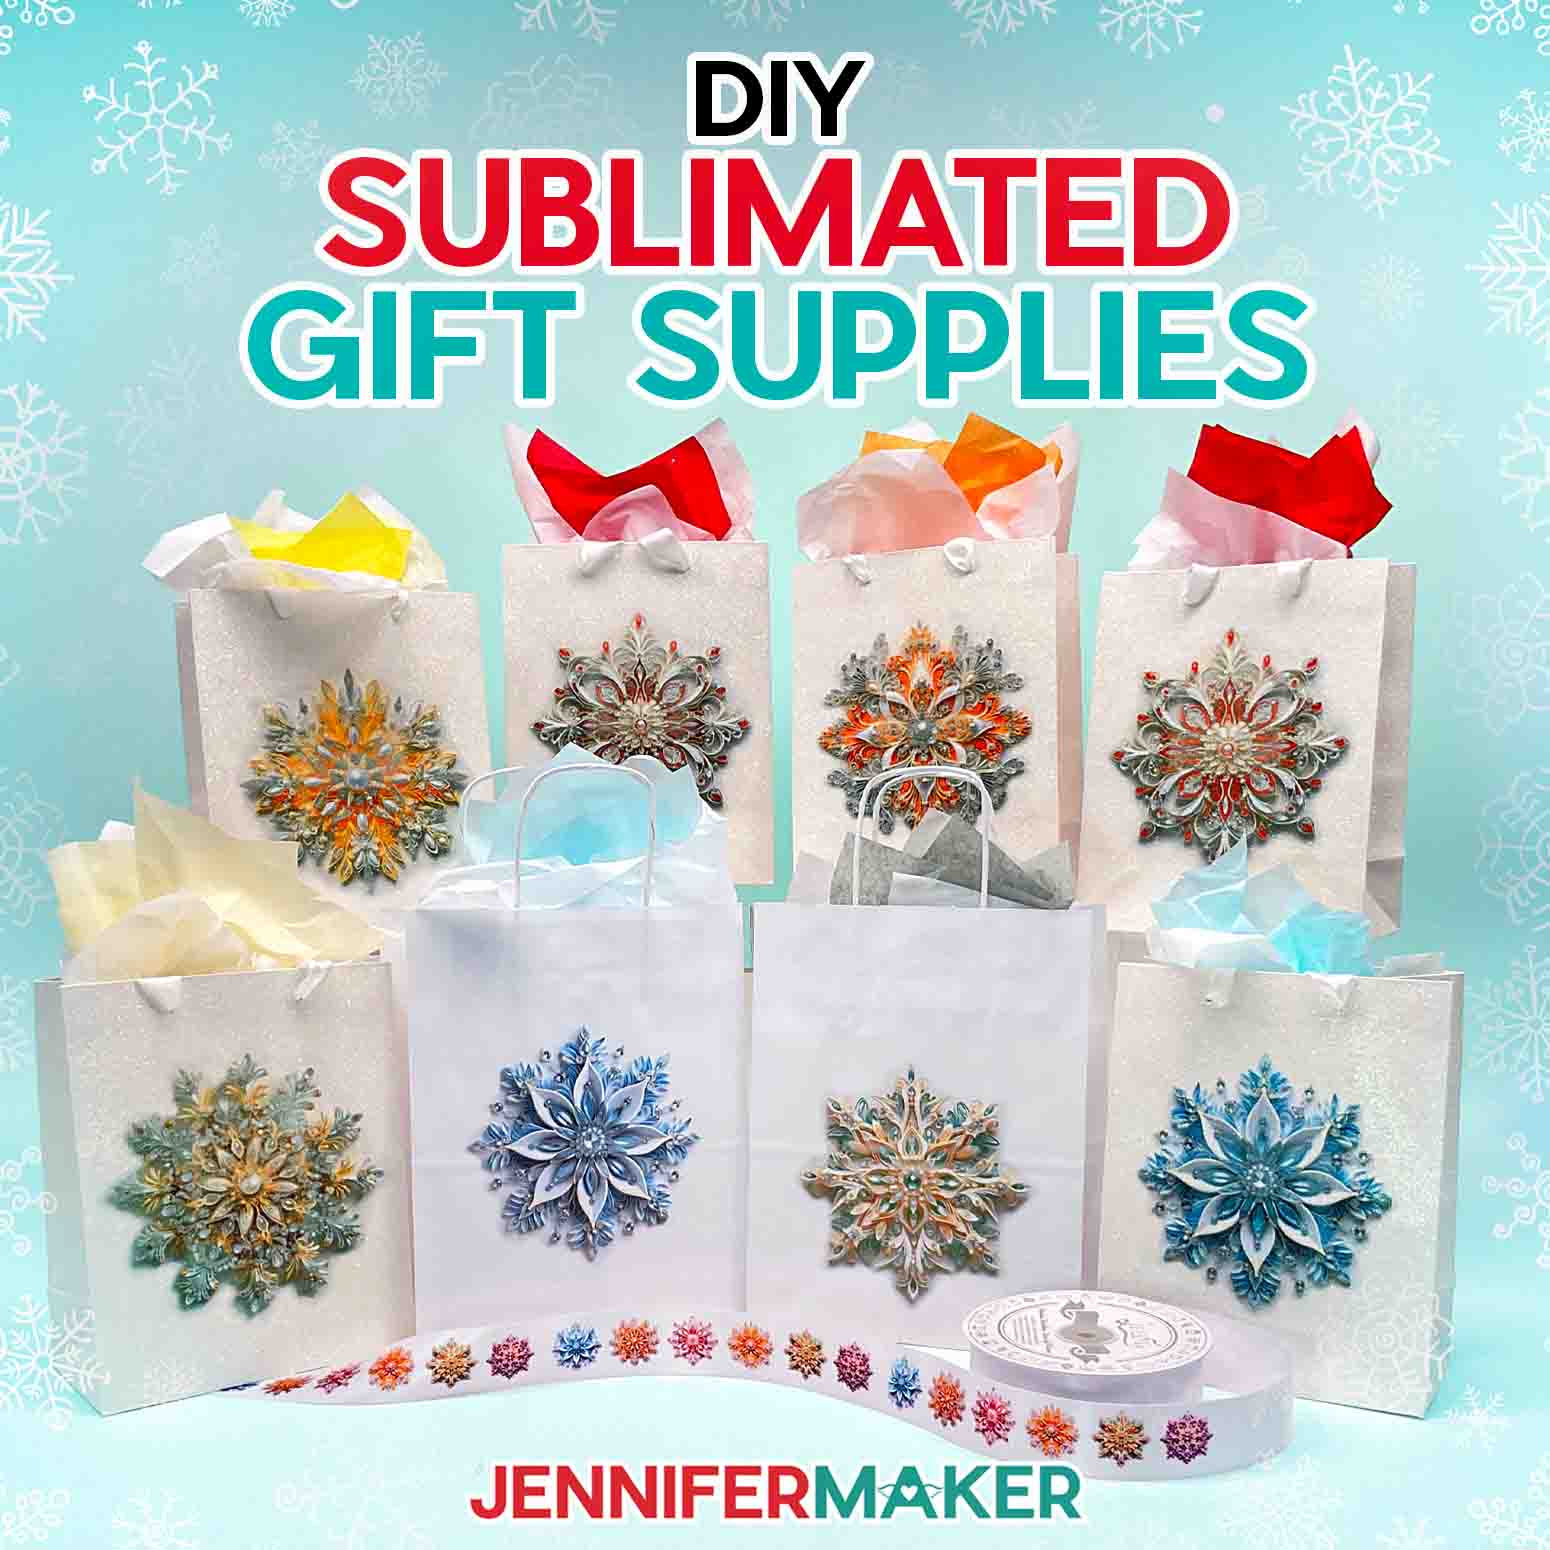 Make DIY Sublimation Gift Supplies with JenniferMaker's tutorial! A roll of ribbon and eight gift bags stuffed with colorful tissue paper feature intricate sublimated snowflake designs.